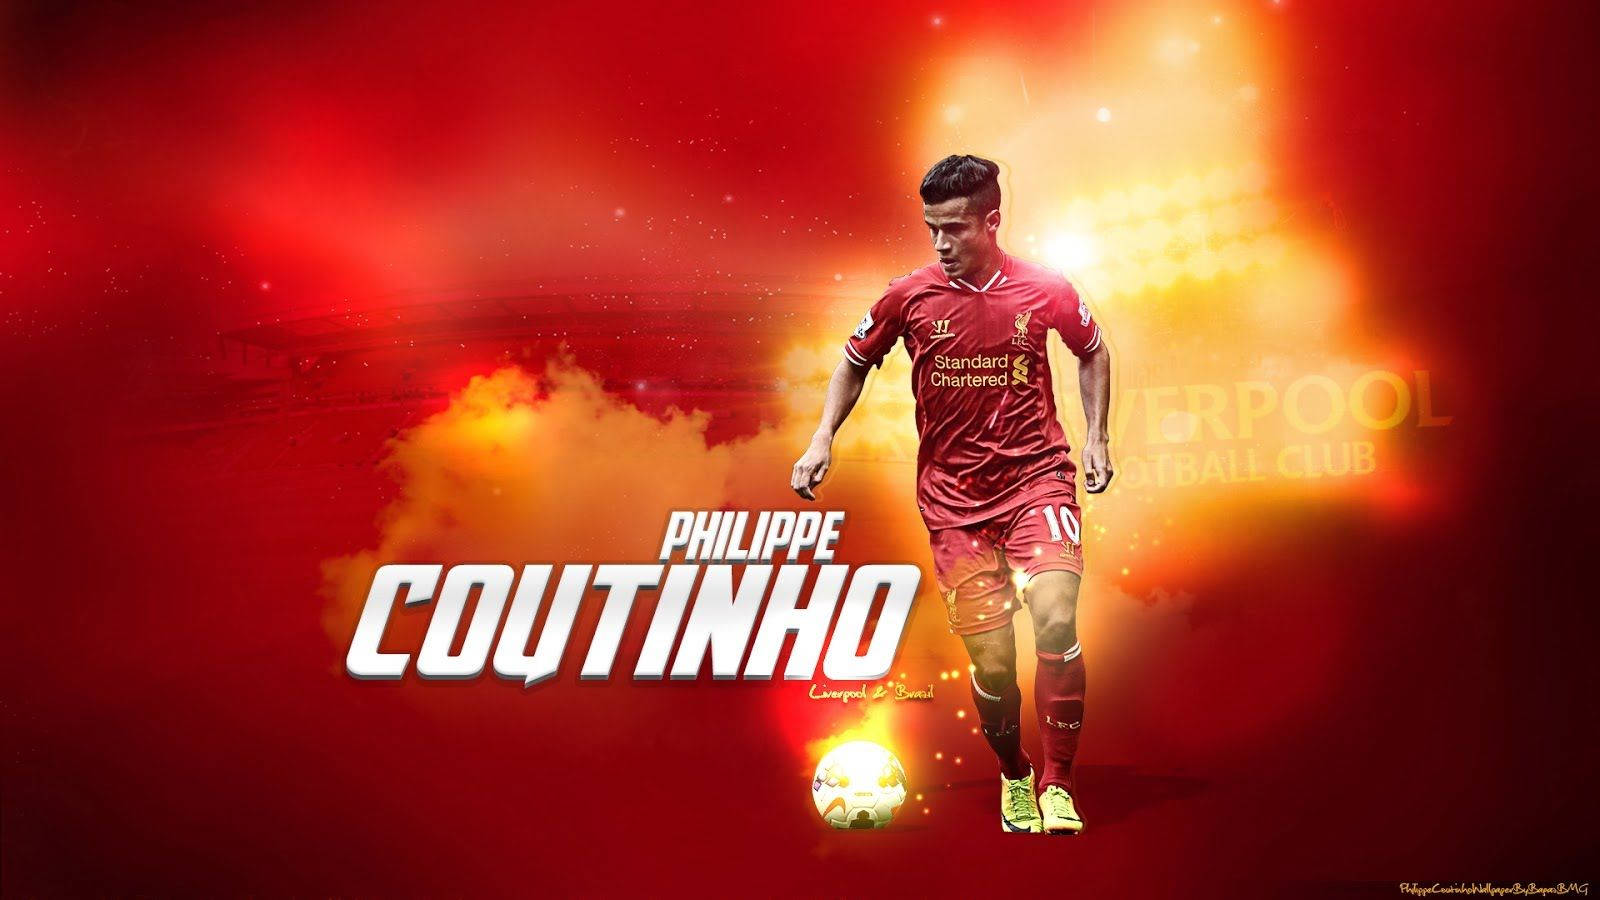 Liverpool Fc Player Philippe Coutinho Wallpaper